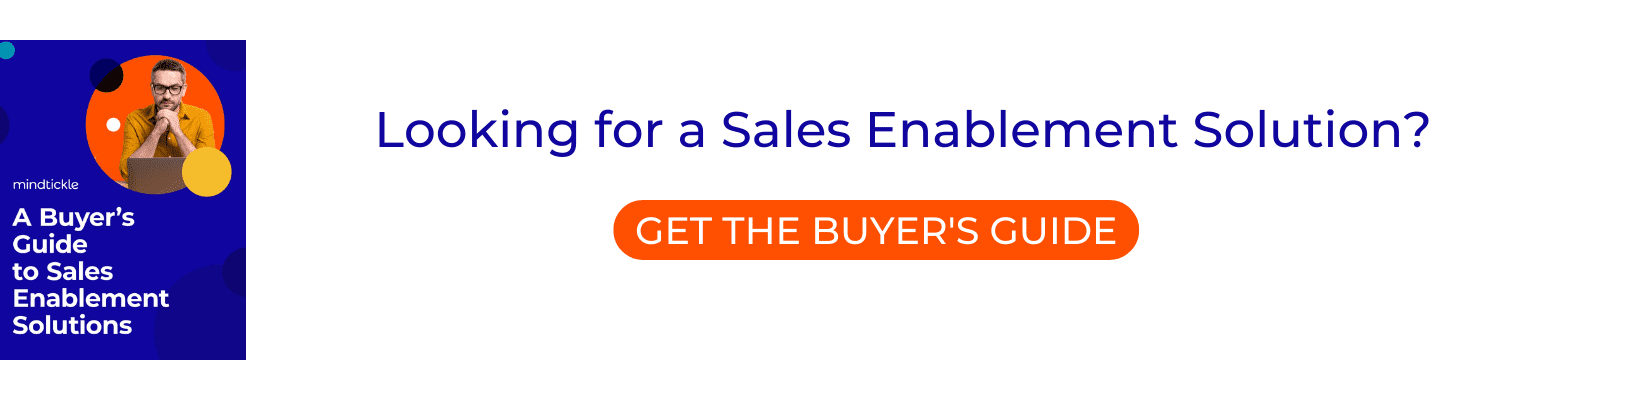 Mindtickle Sales Enablement Buyer's Guide cover